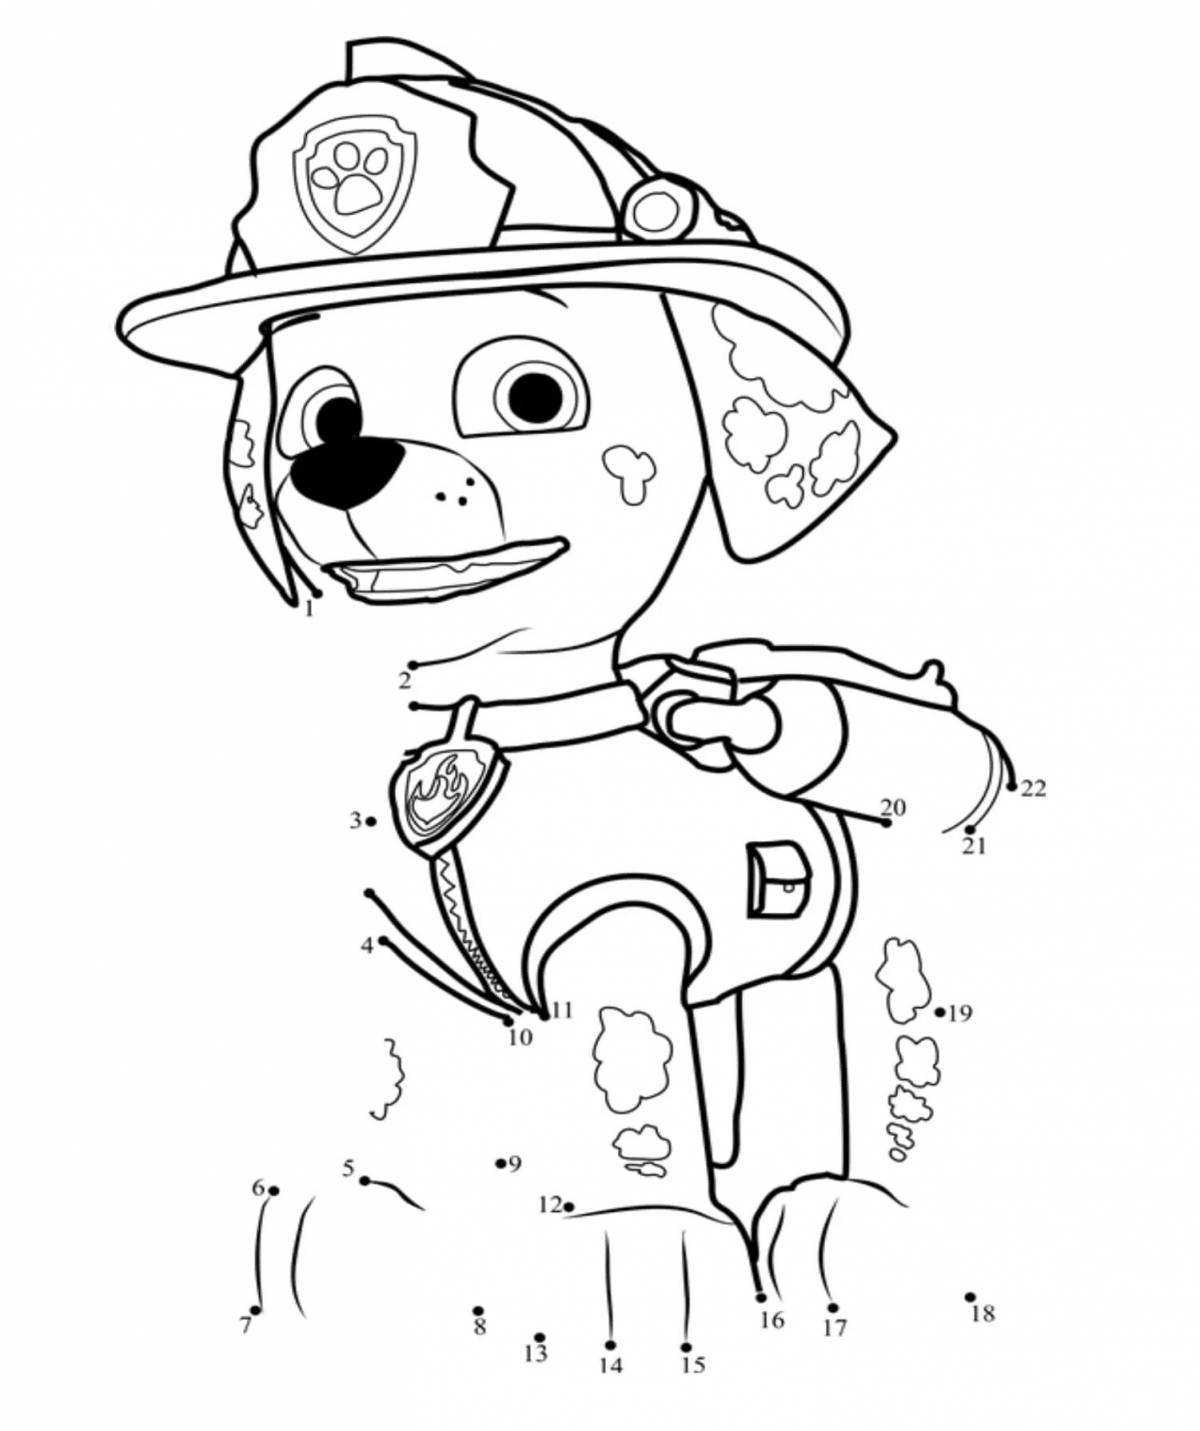 Fun coloring page paw patrol for children 5-6 years old